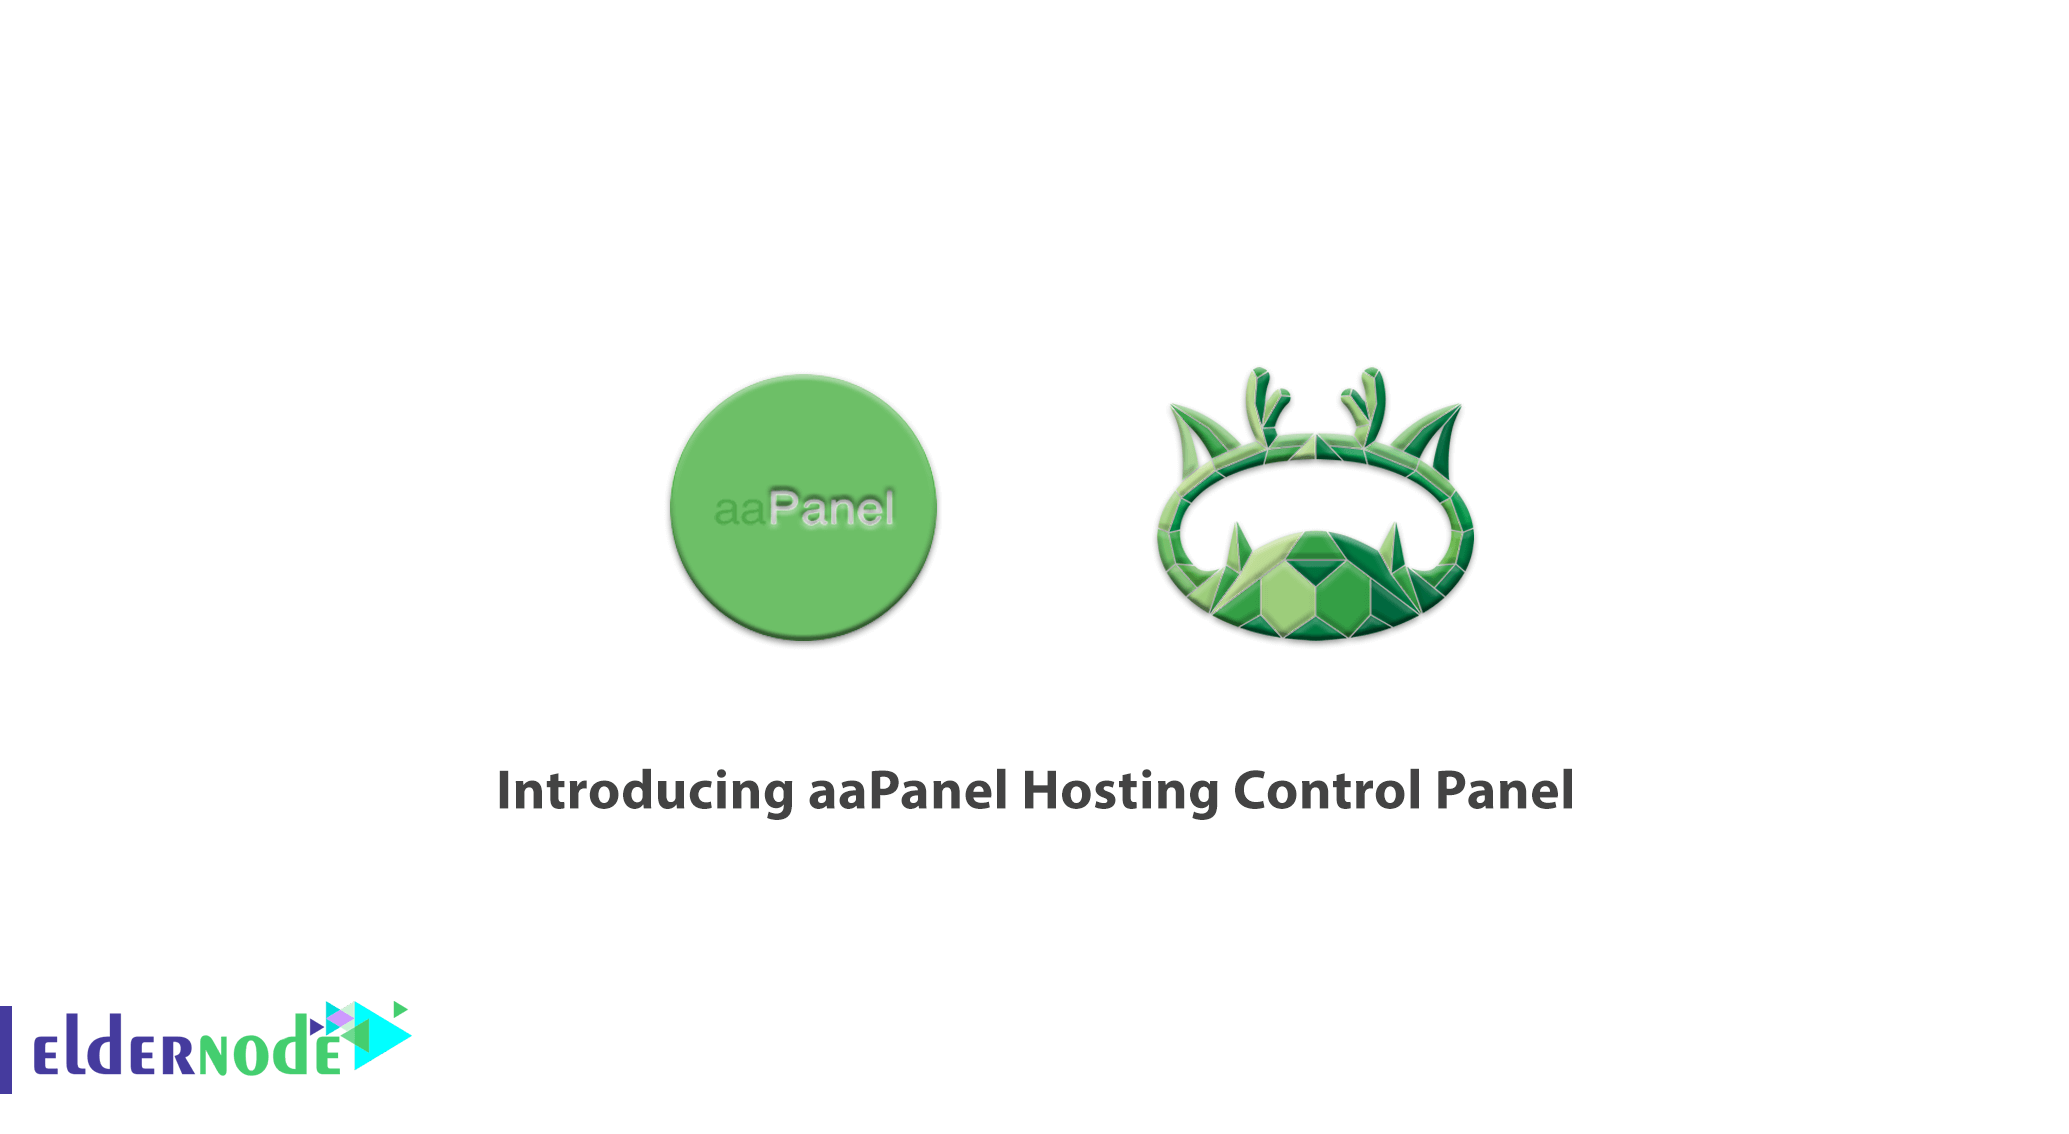 Introducing aaPanel Hosting Control Panel